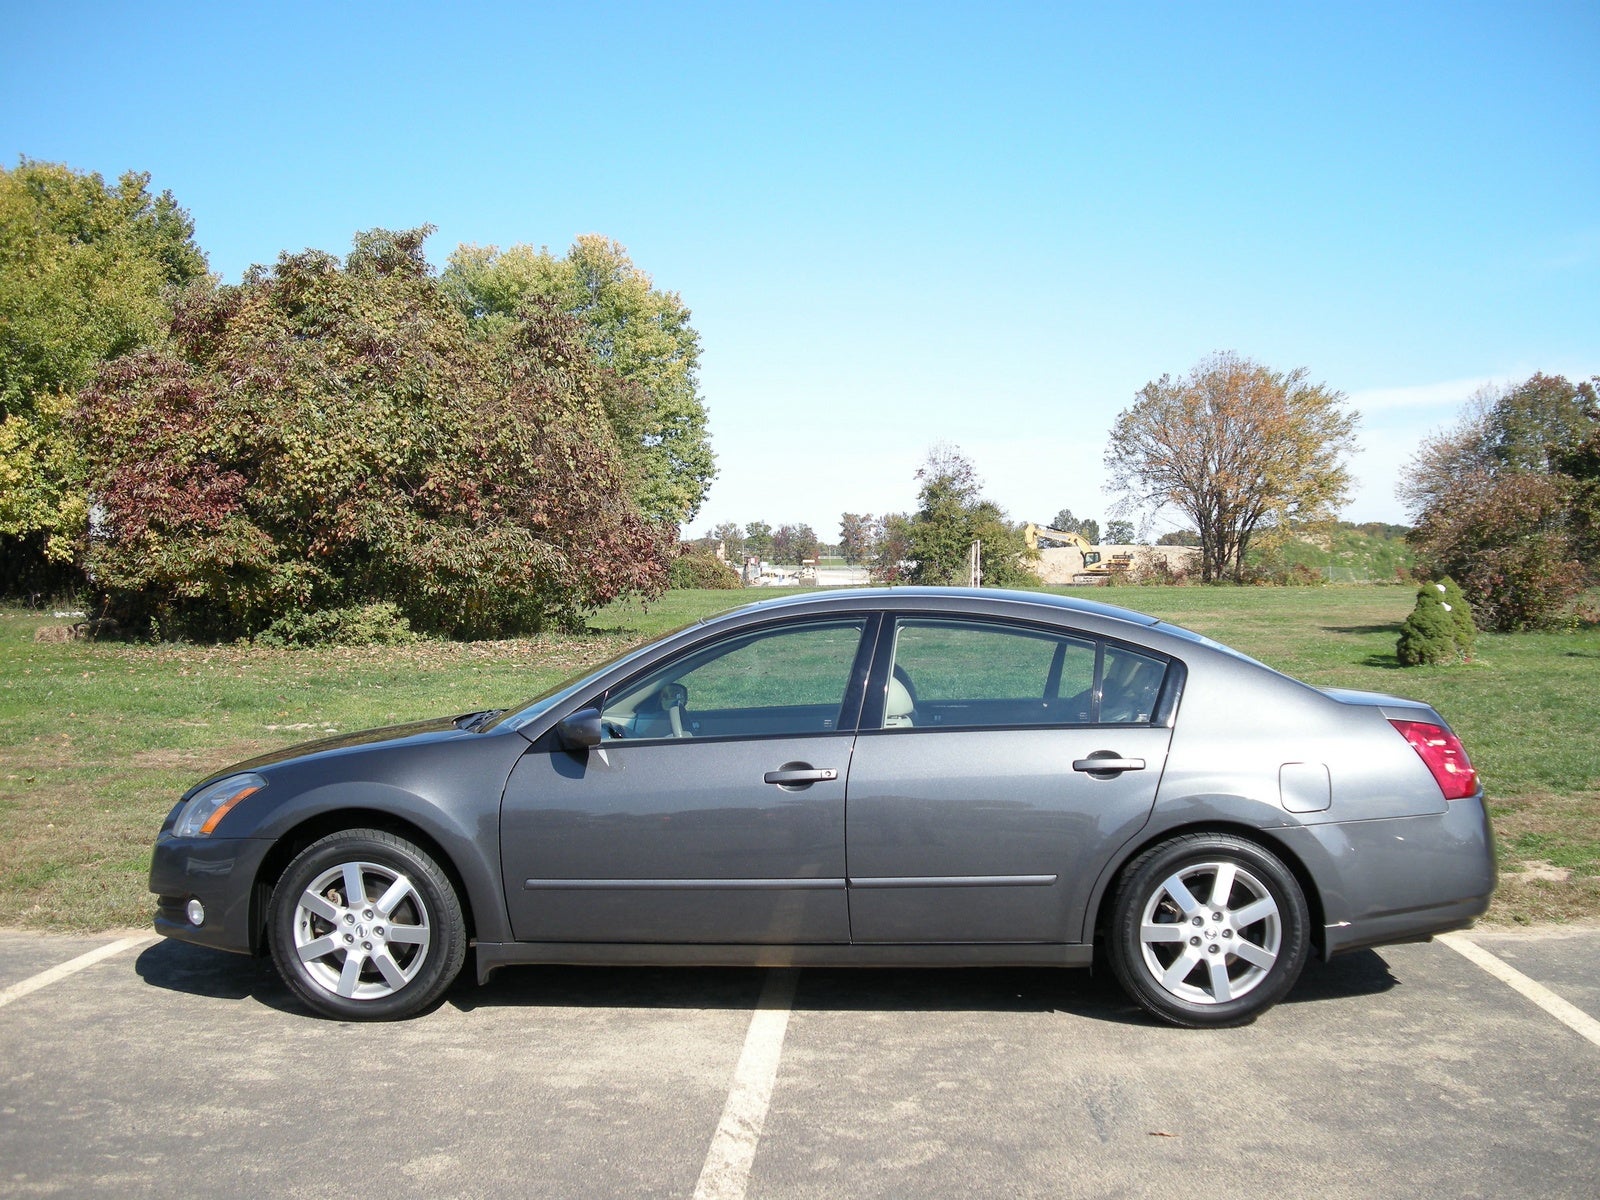 Is 2004 nissan maxima reliable #10